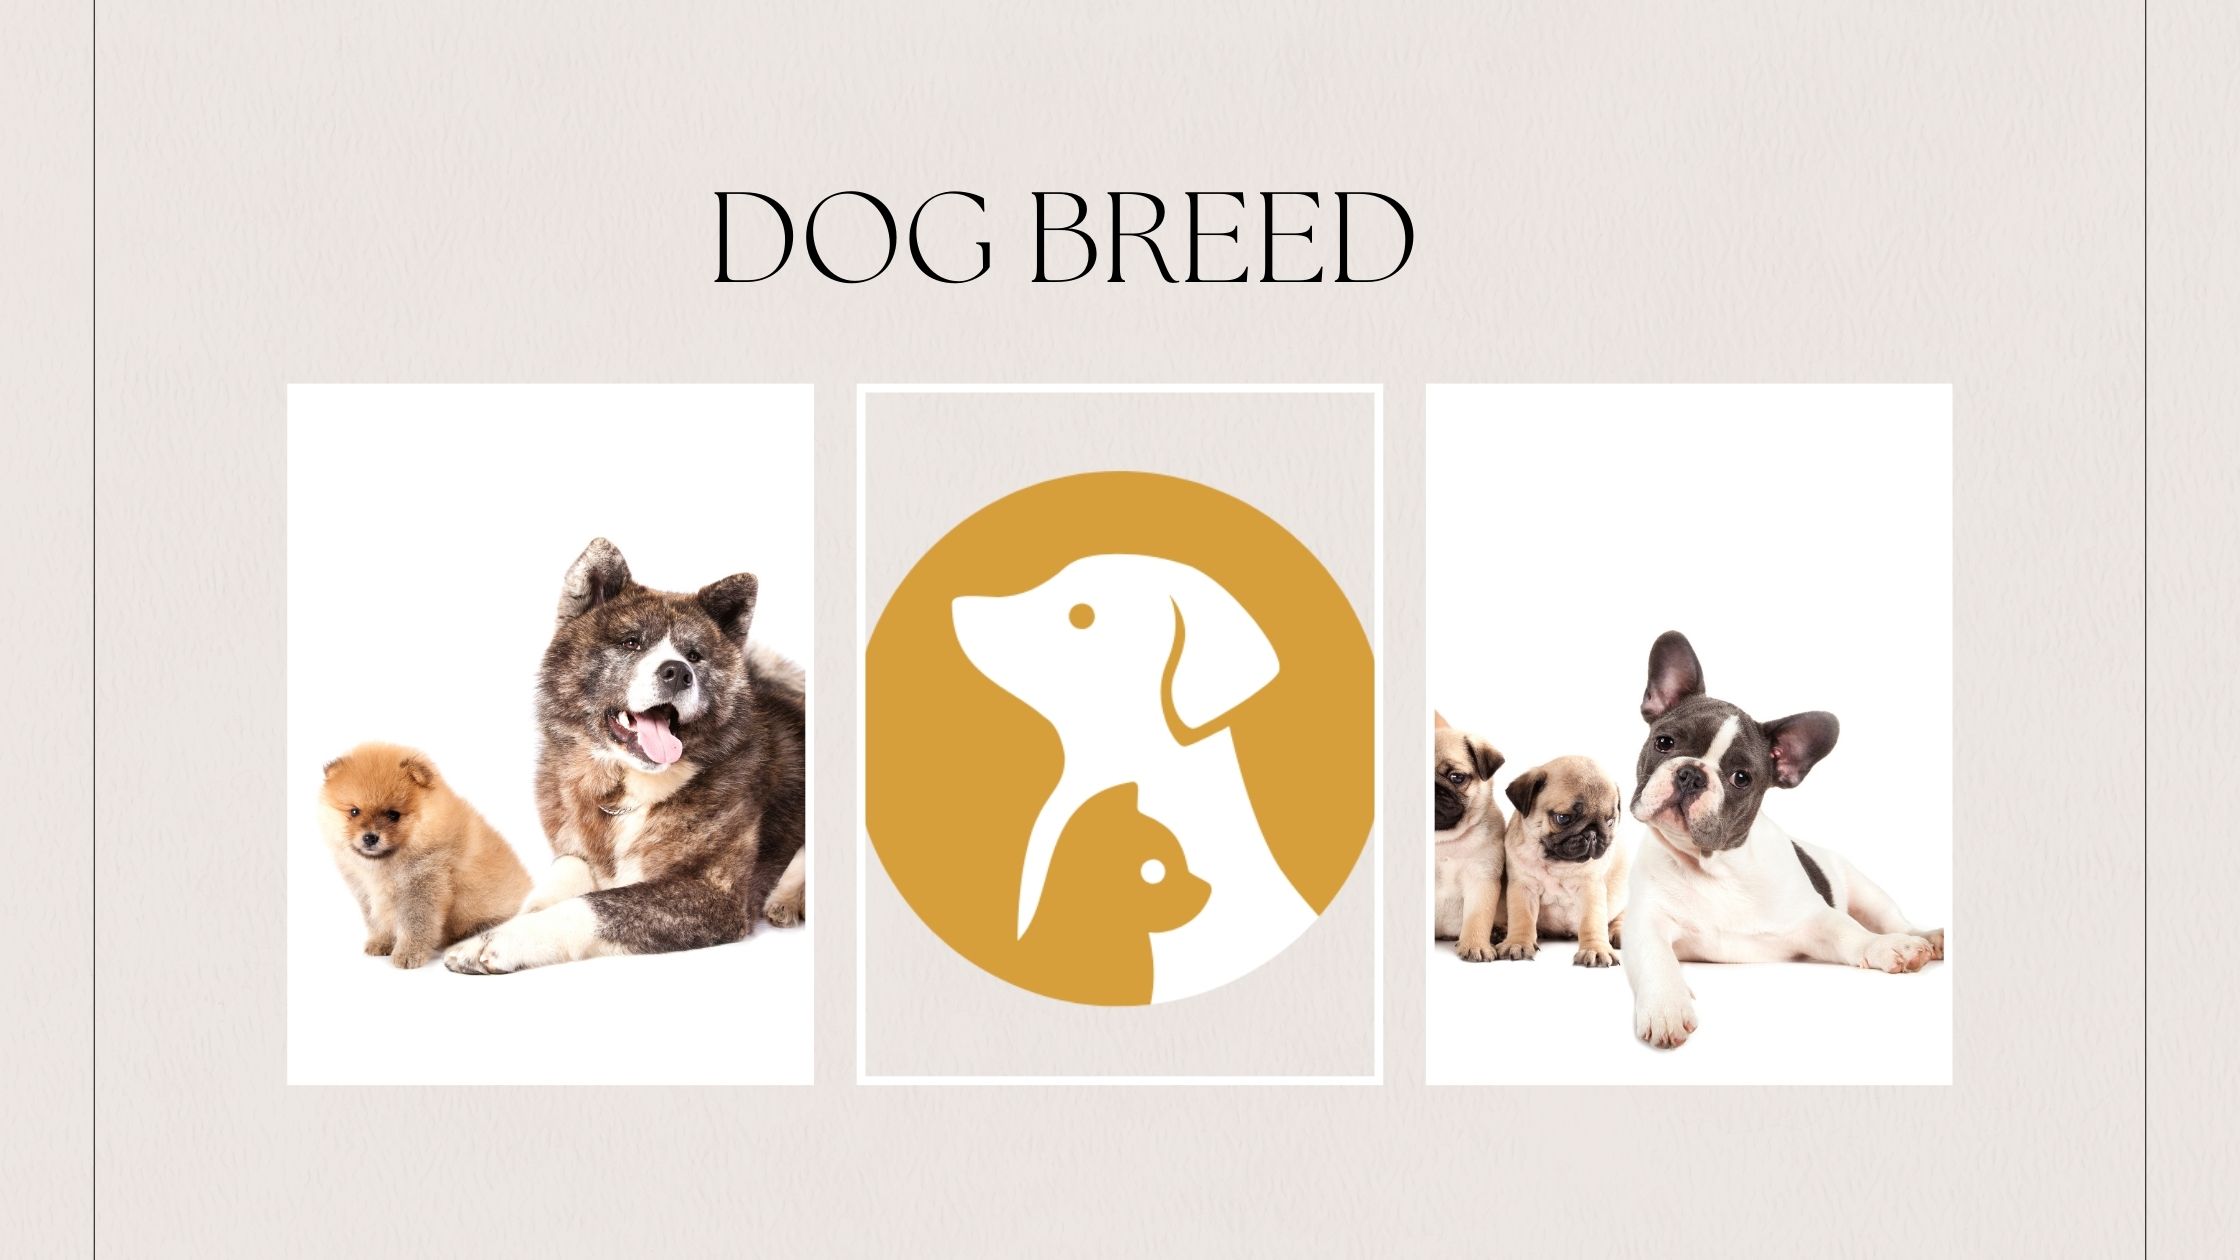 What Is The Least Shedding Dog Breed?